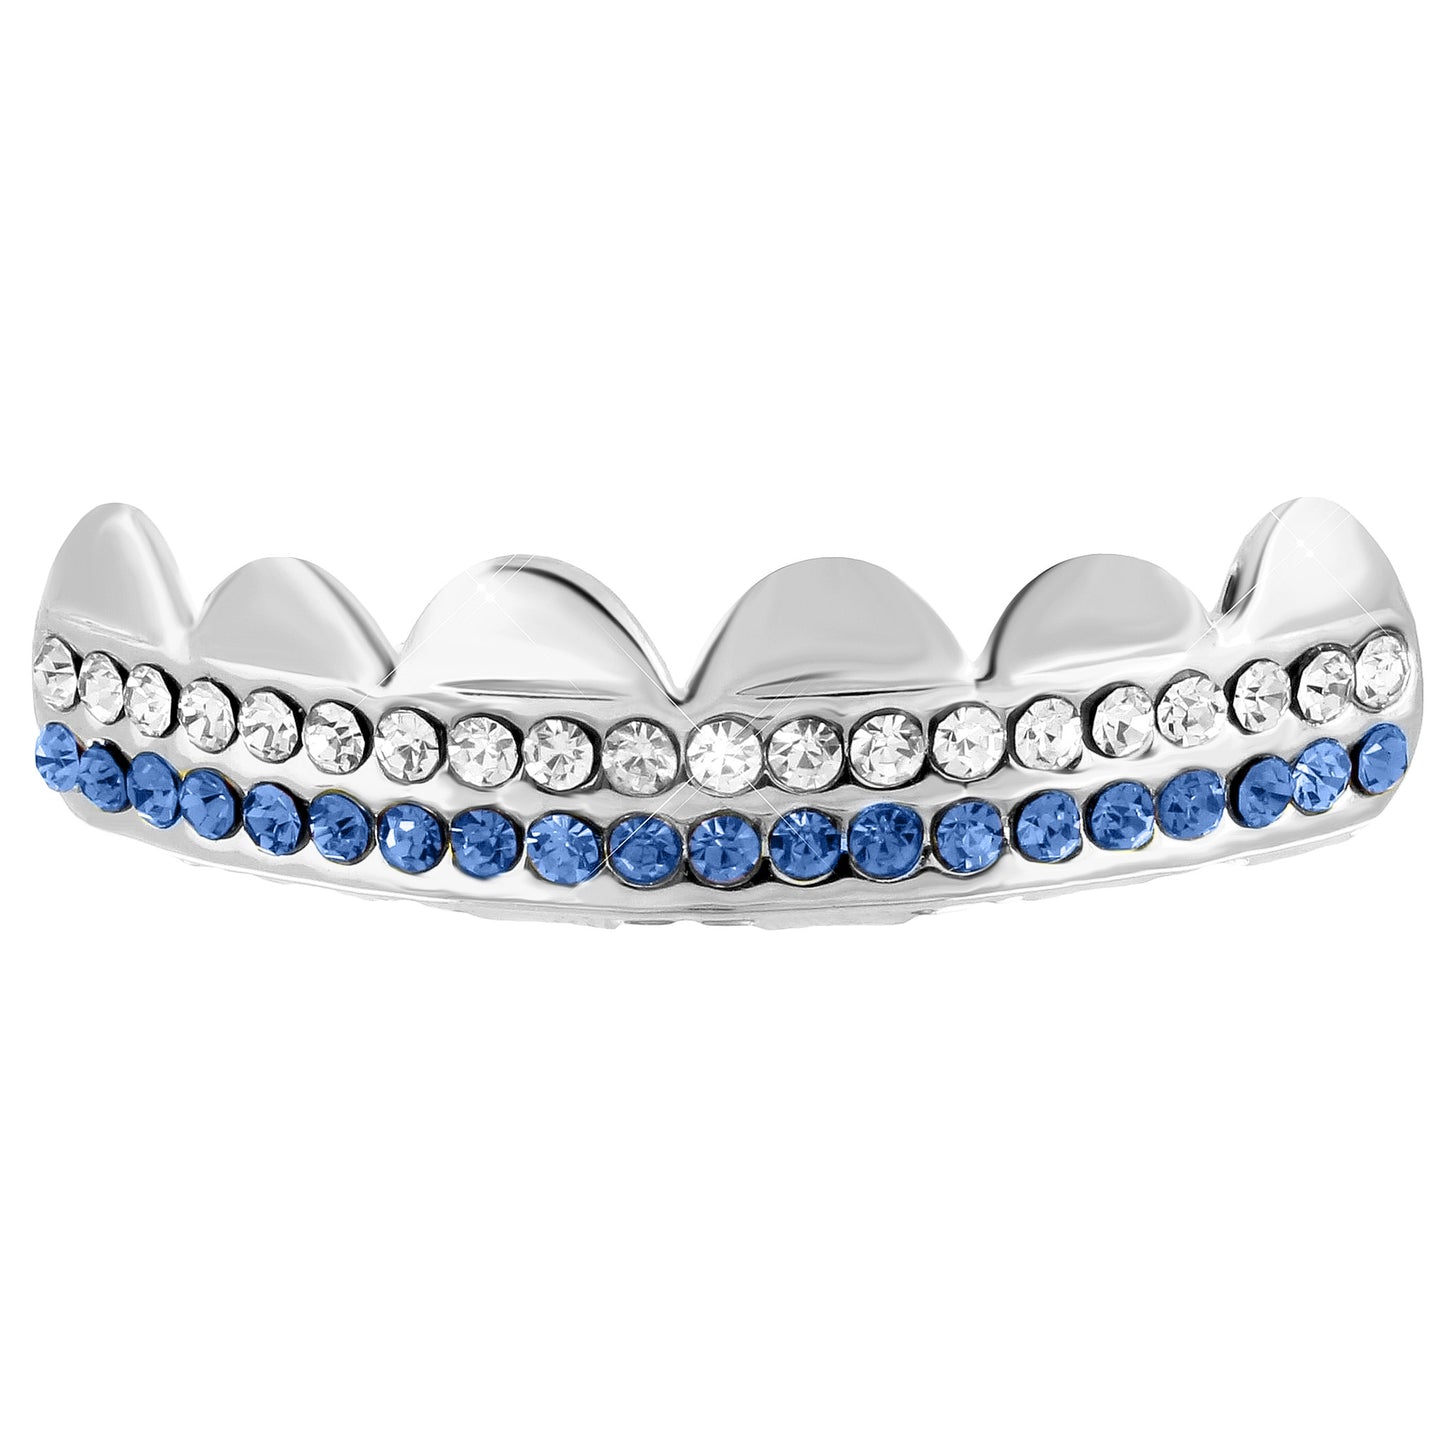 White Gold Finish 2 Row Bling Top Grillz